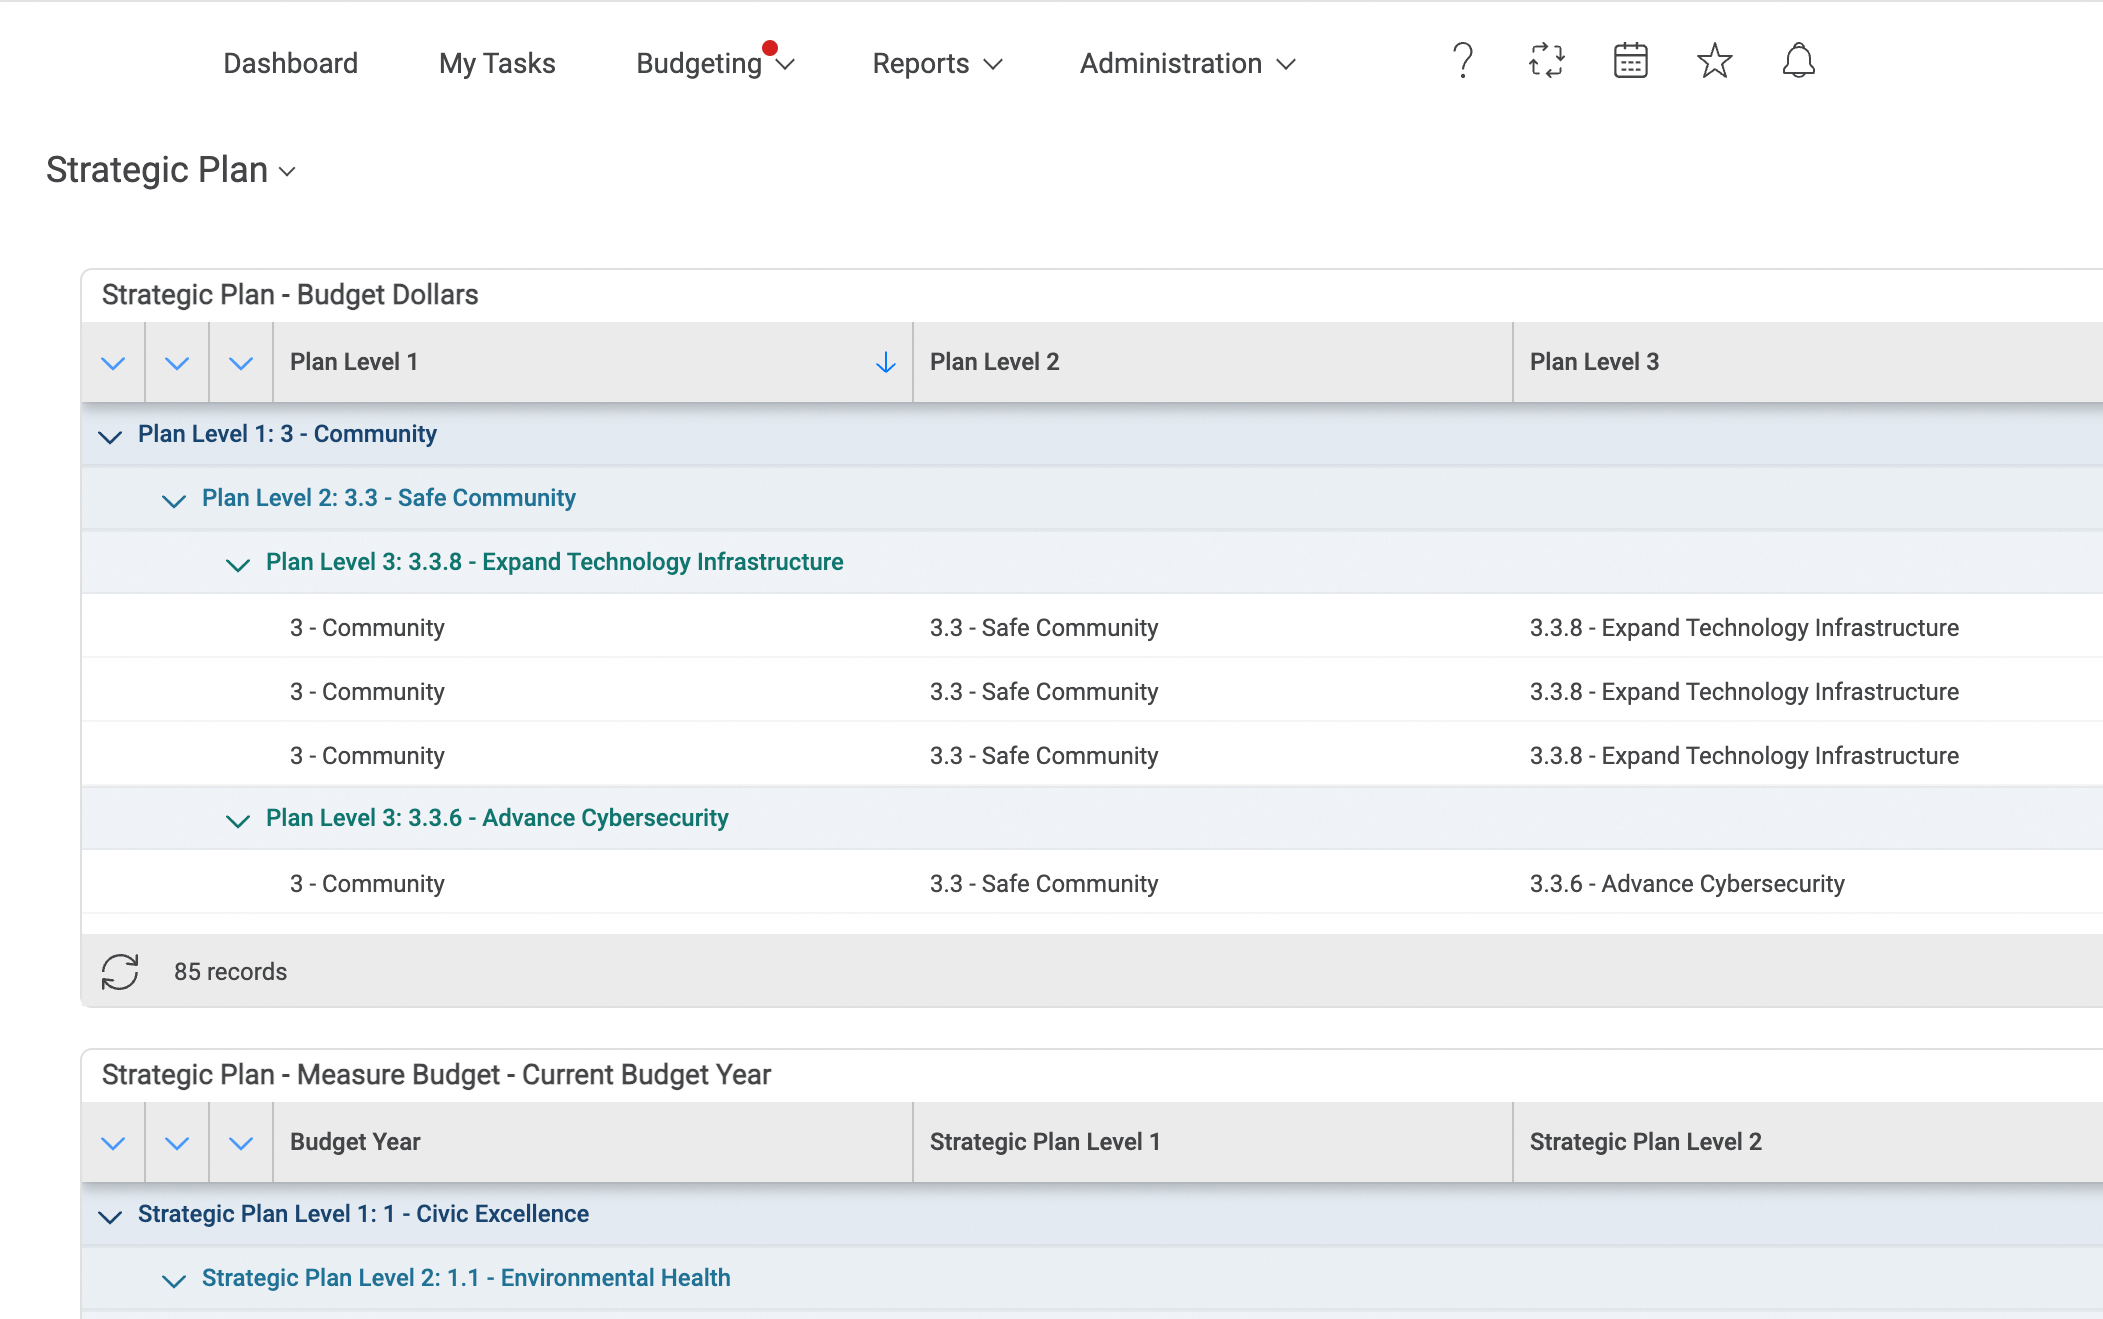 Screenshot of a project management software interface showing a strategic plan budget with various levels of detail expanded.